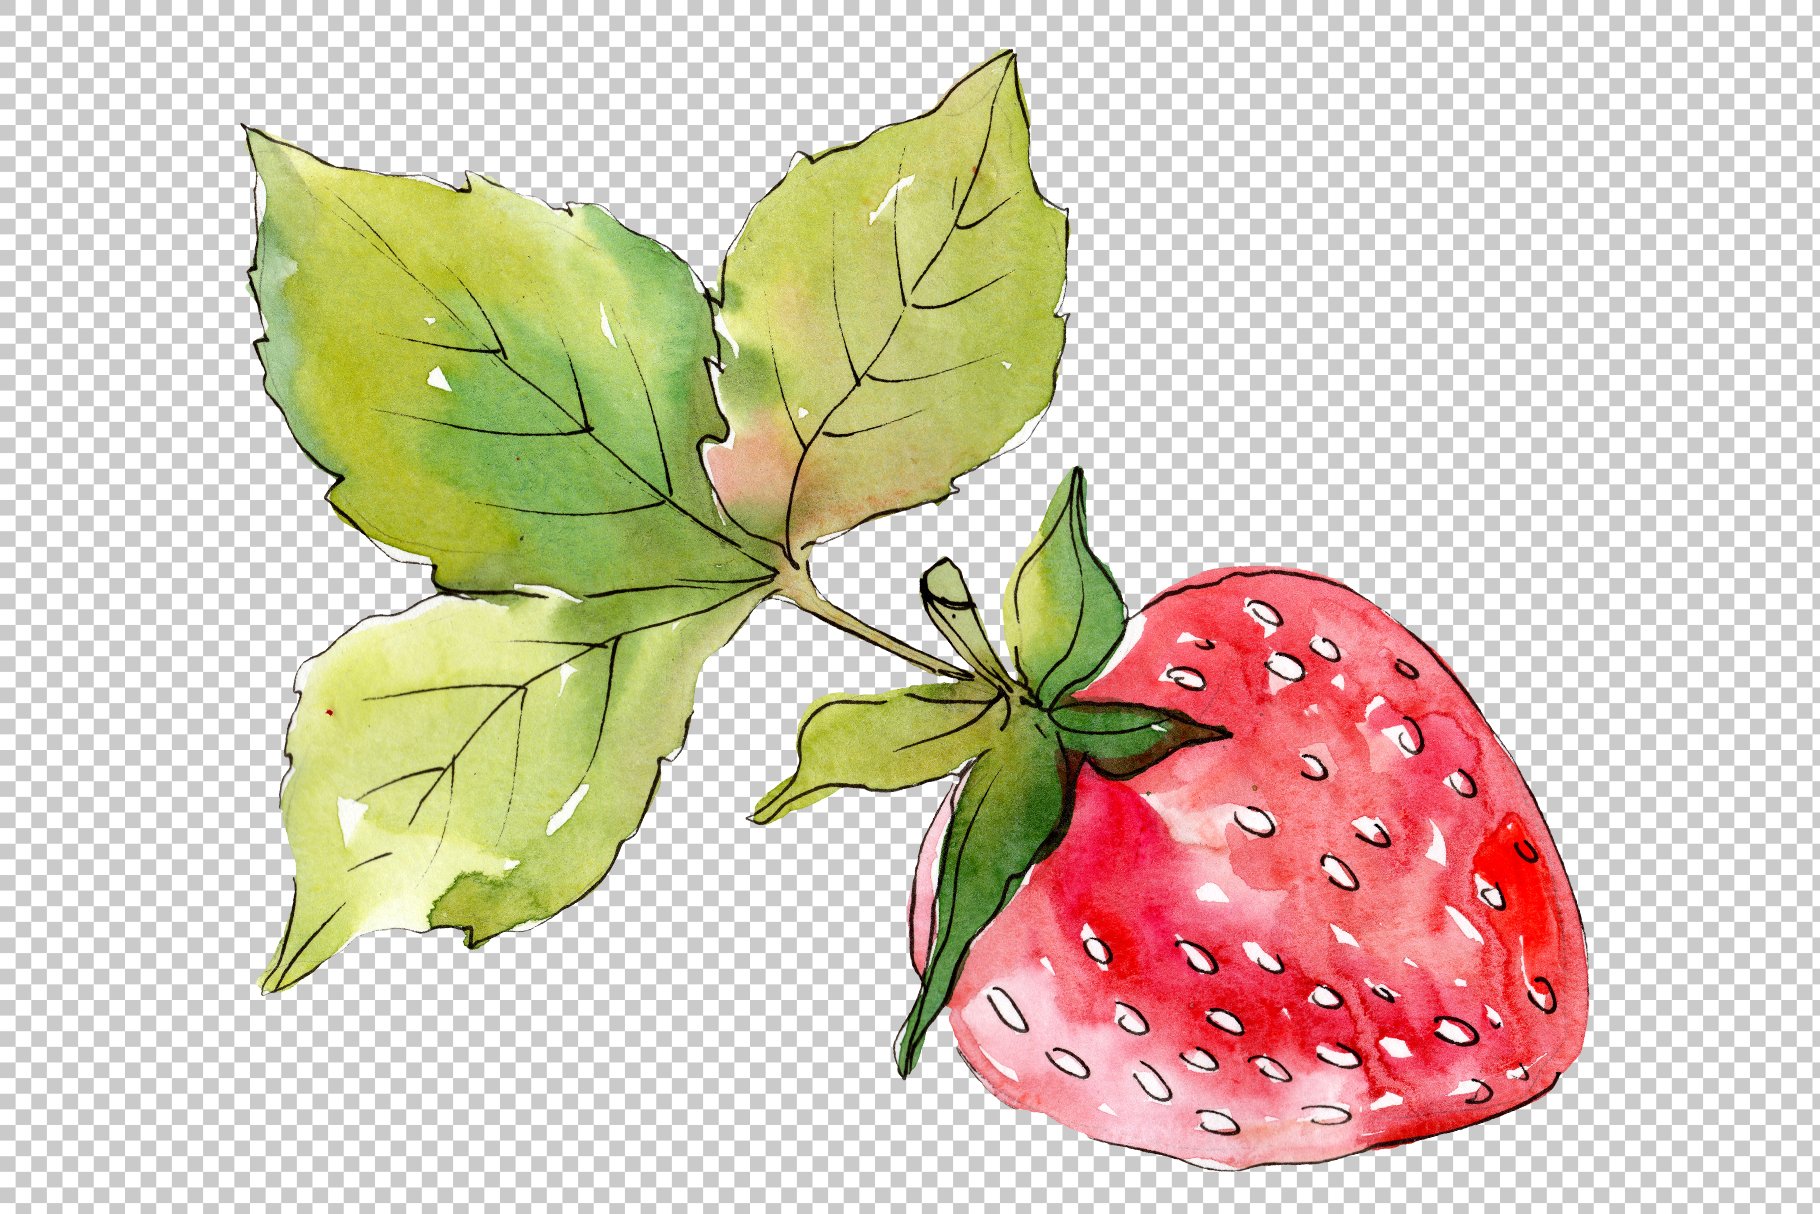 Green leaves with the strawberry.